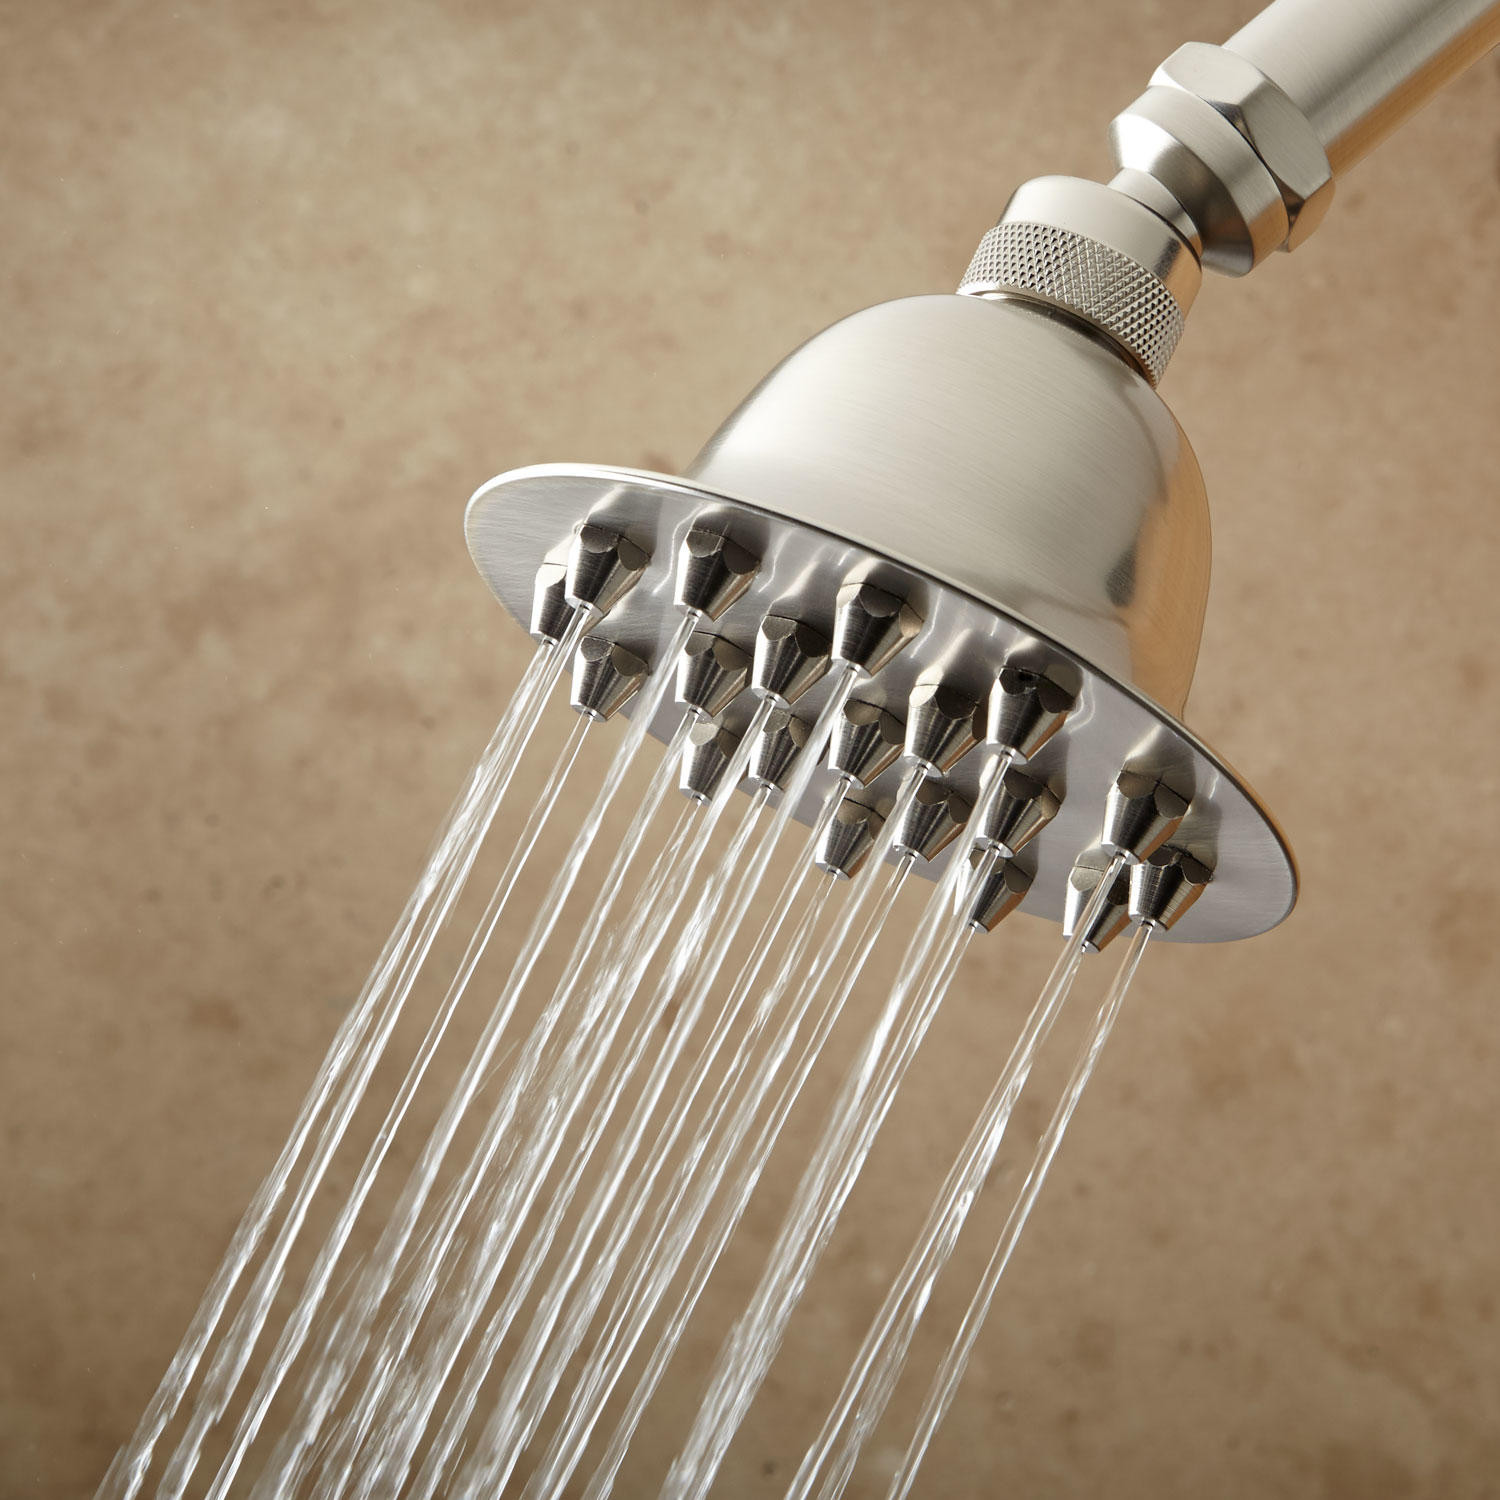 Bathroom Shower Head
 Labella Nozzle Shower Head Shower Heads and Arms